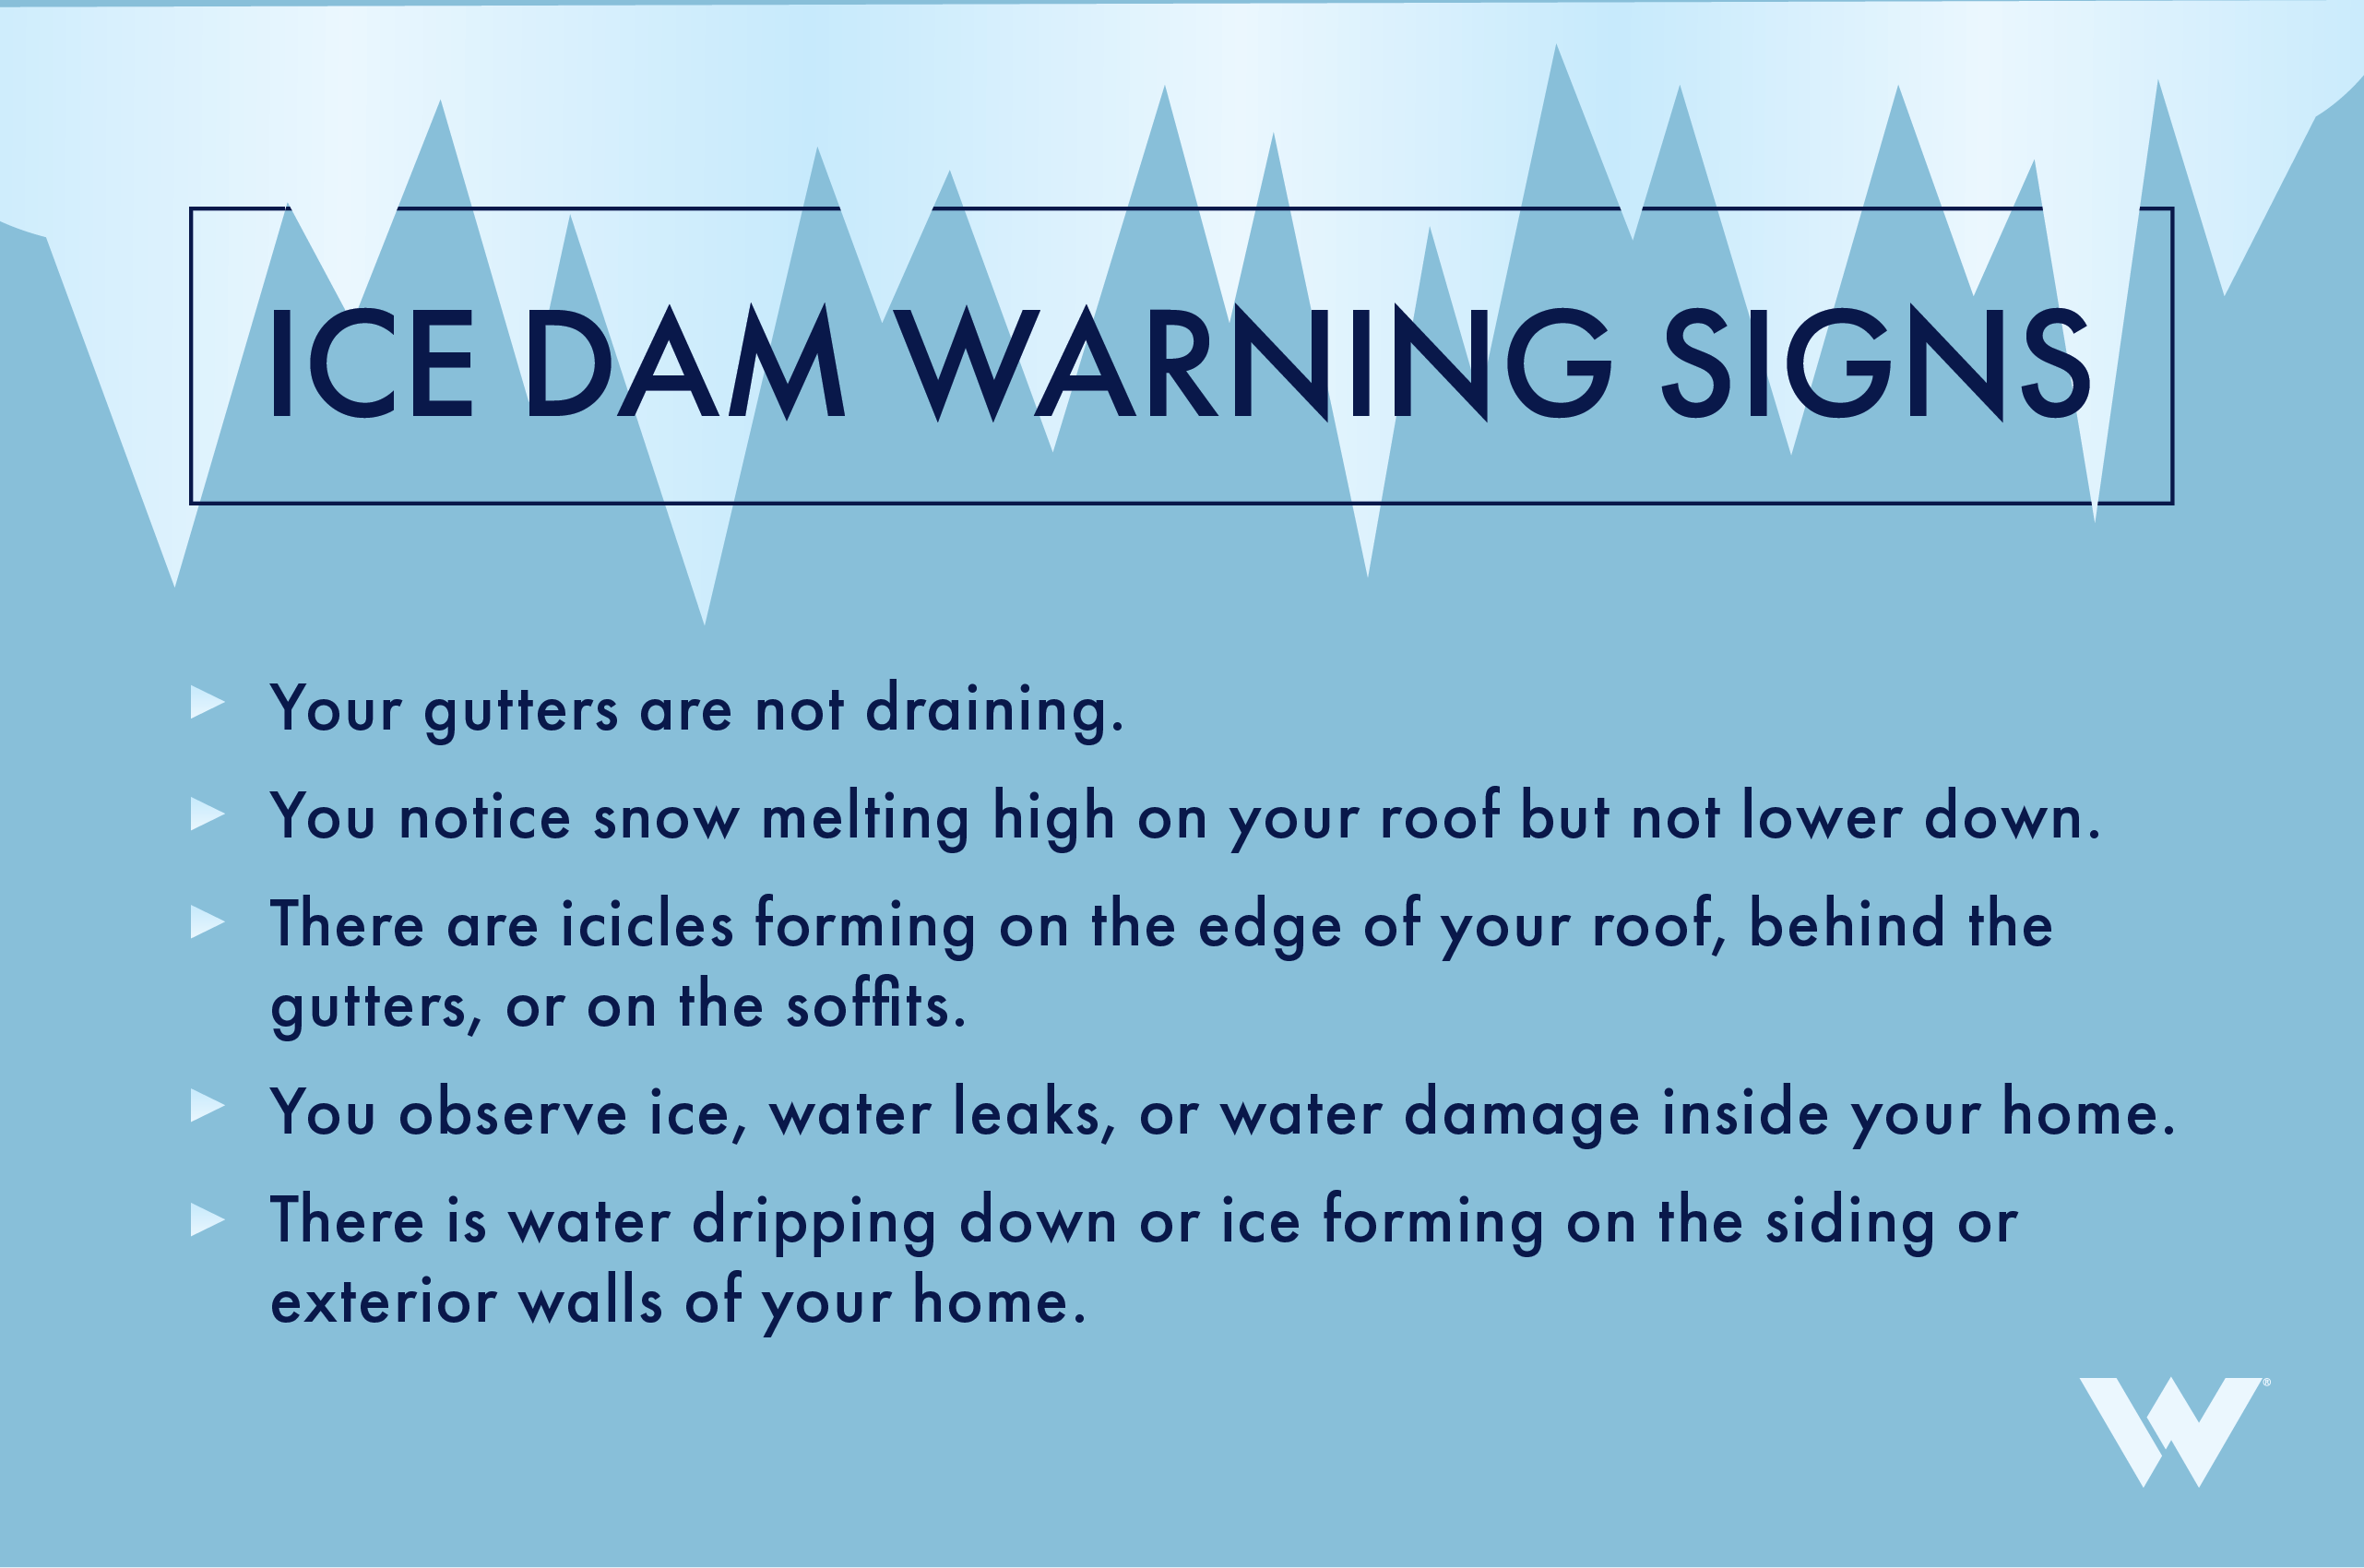 A social media graphic listing warning signs for ice dams.